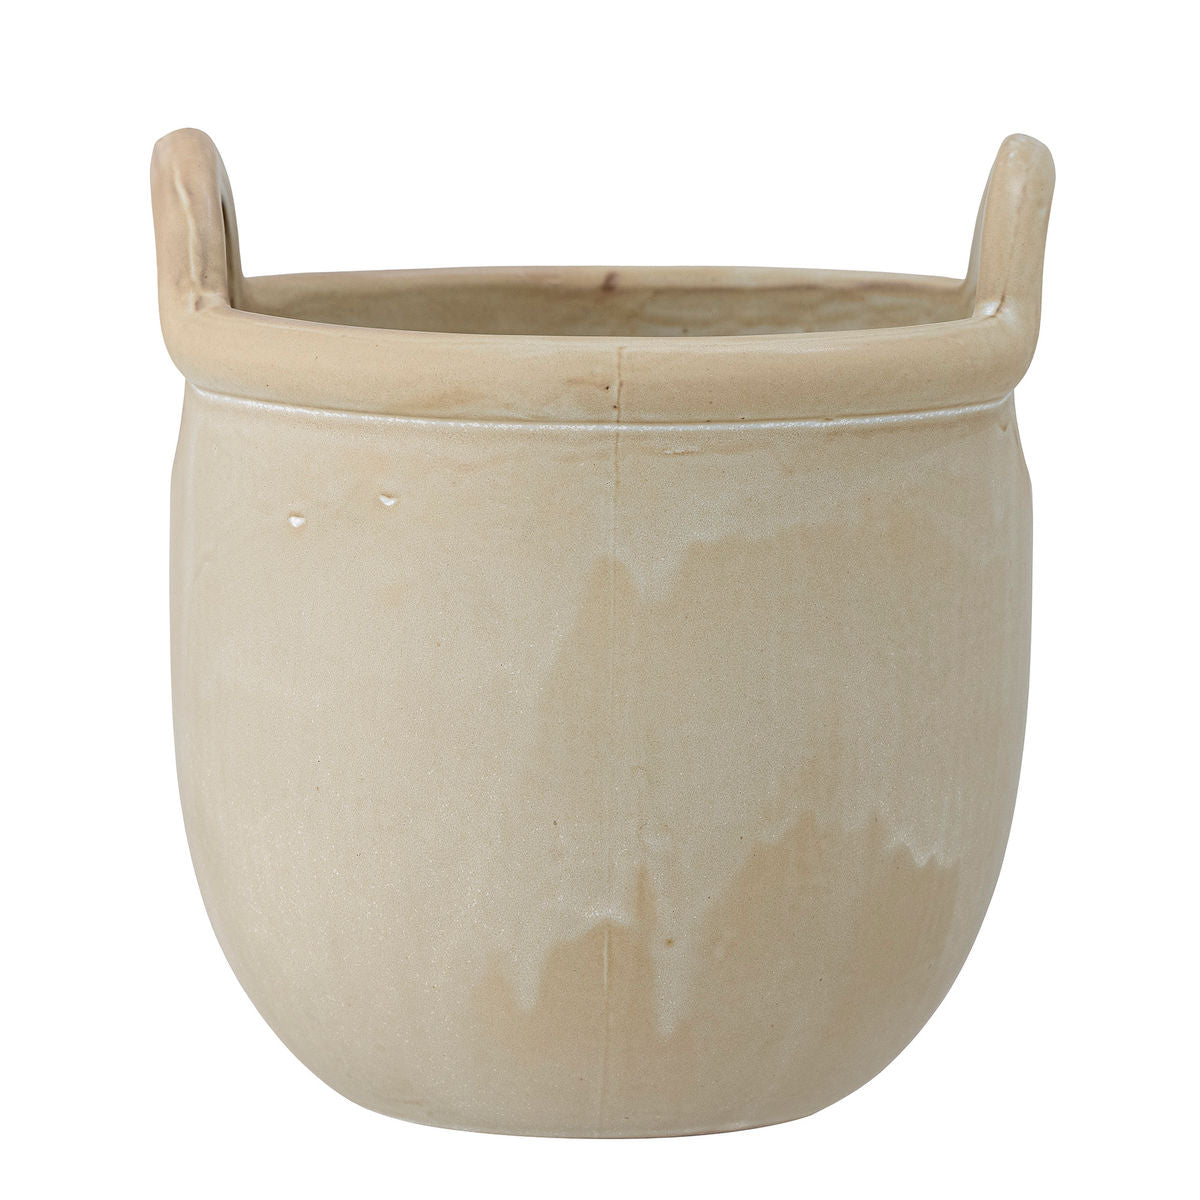 Bloomingville Janti Herbal Potted Hids, Gray, Stoneware